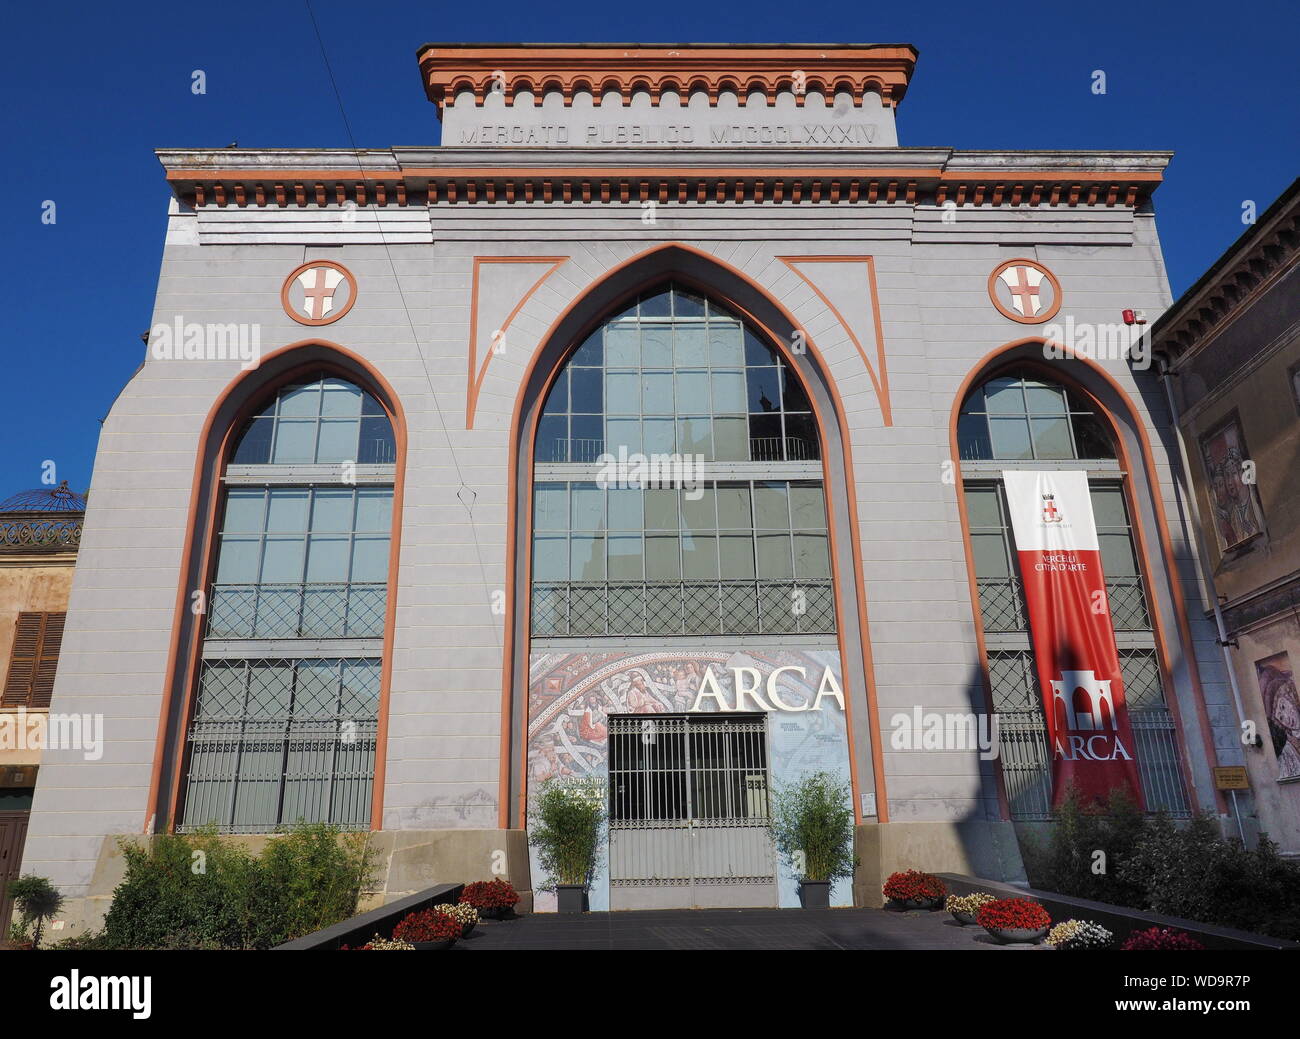 Vercelli, Italy, 15 August 2019: Facade municipal market in the middle of Vercelli city, Piedmont, Italy. Stock Photo